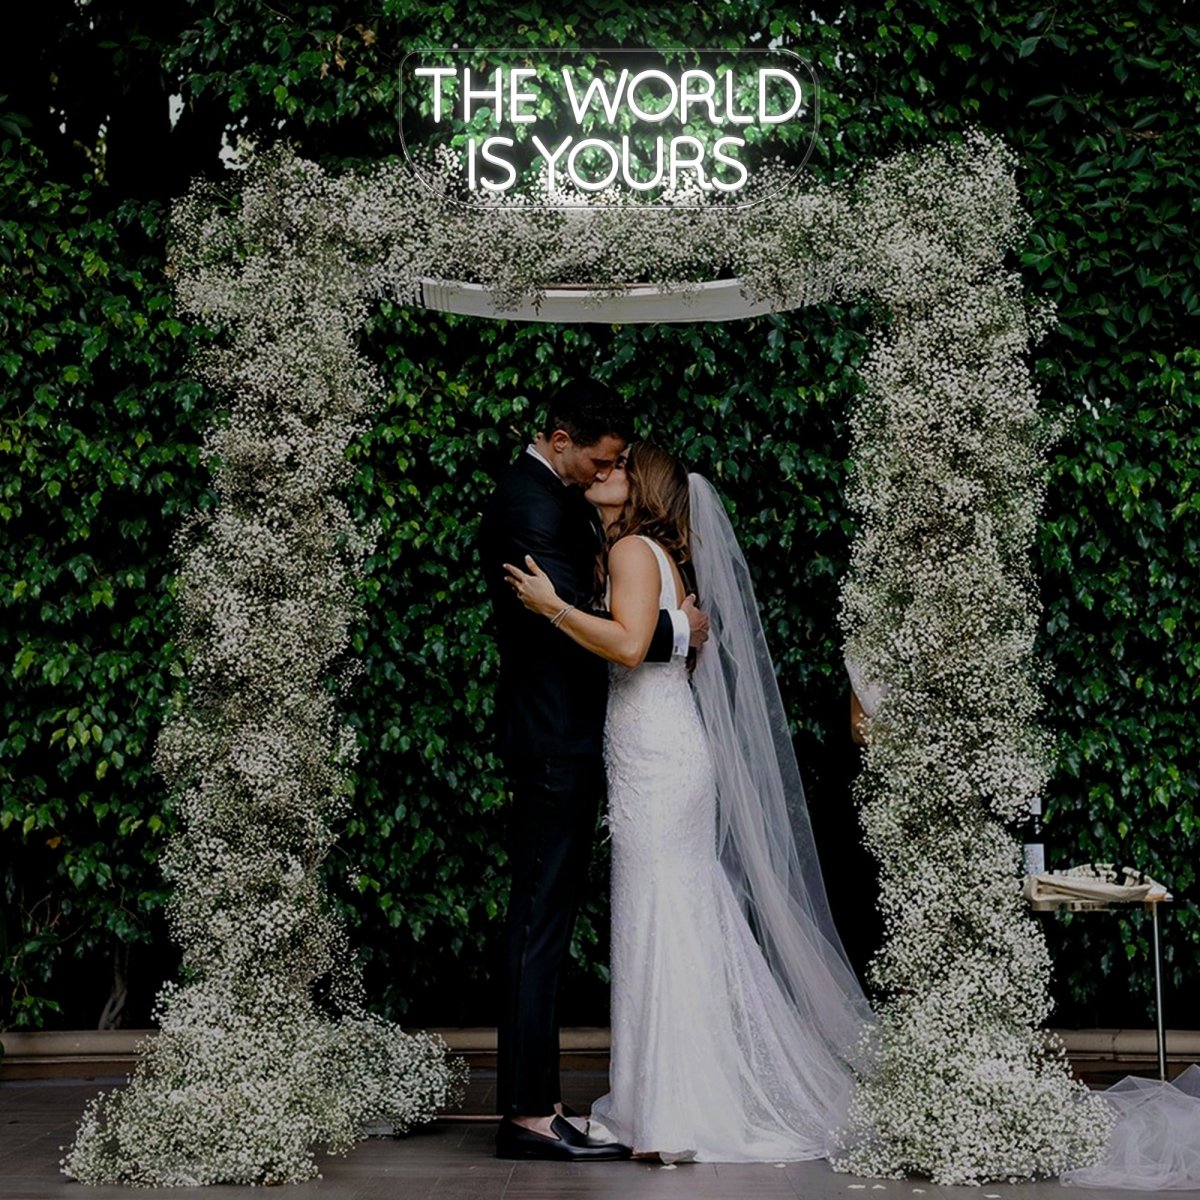 The World Is Yours Wedding Led Neon Sign - Reels Custom